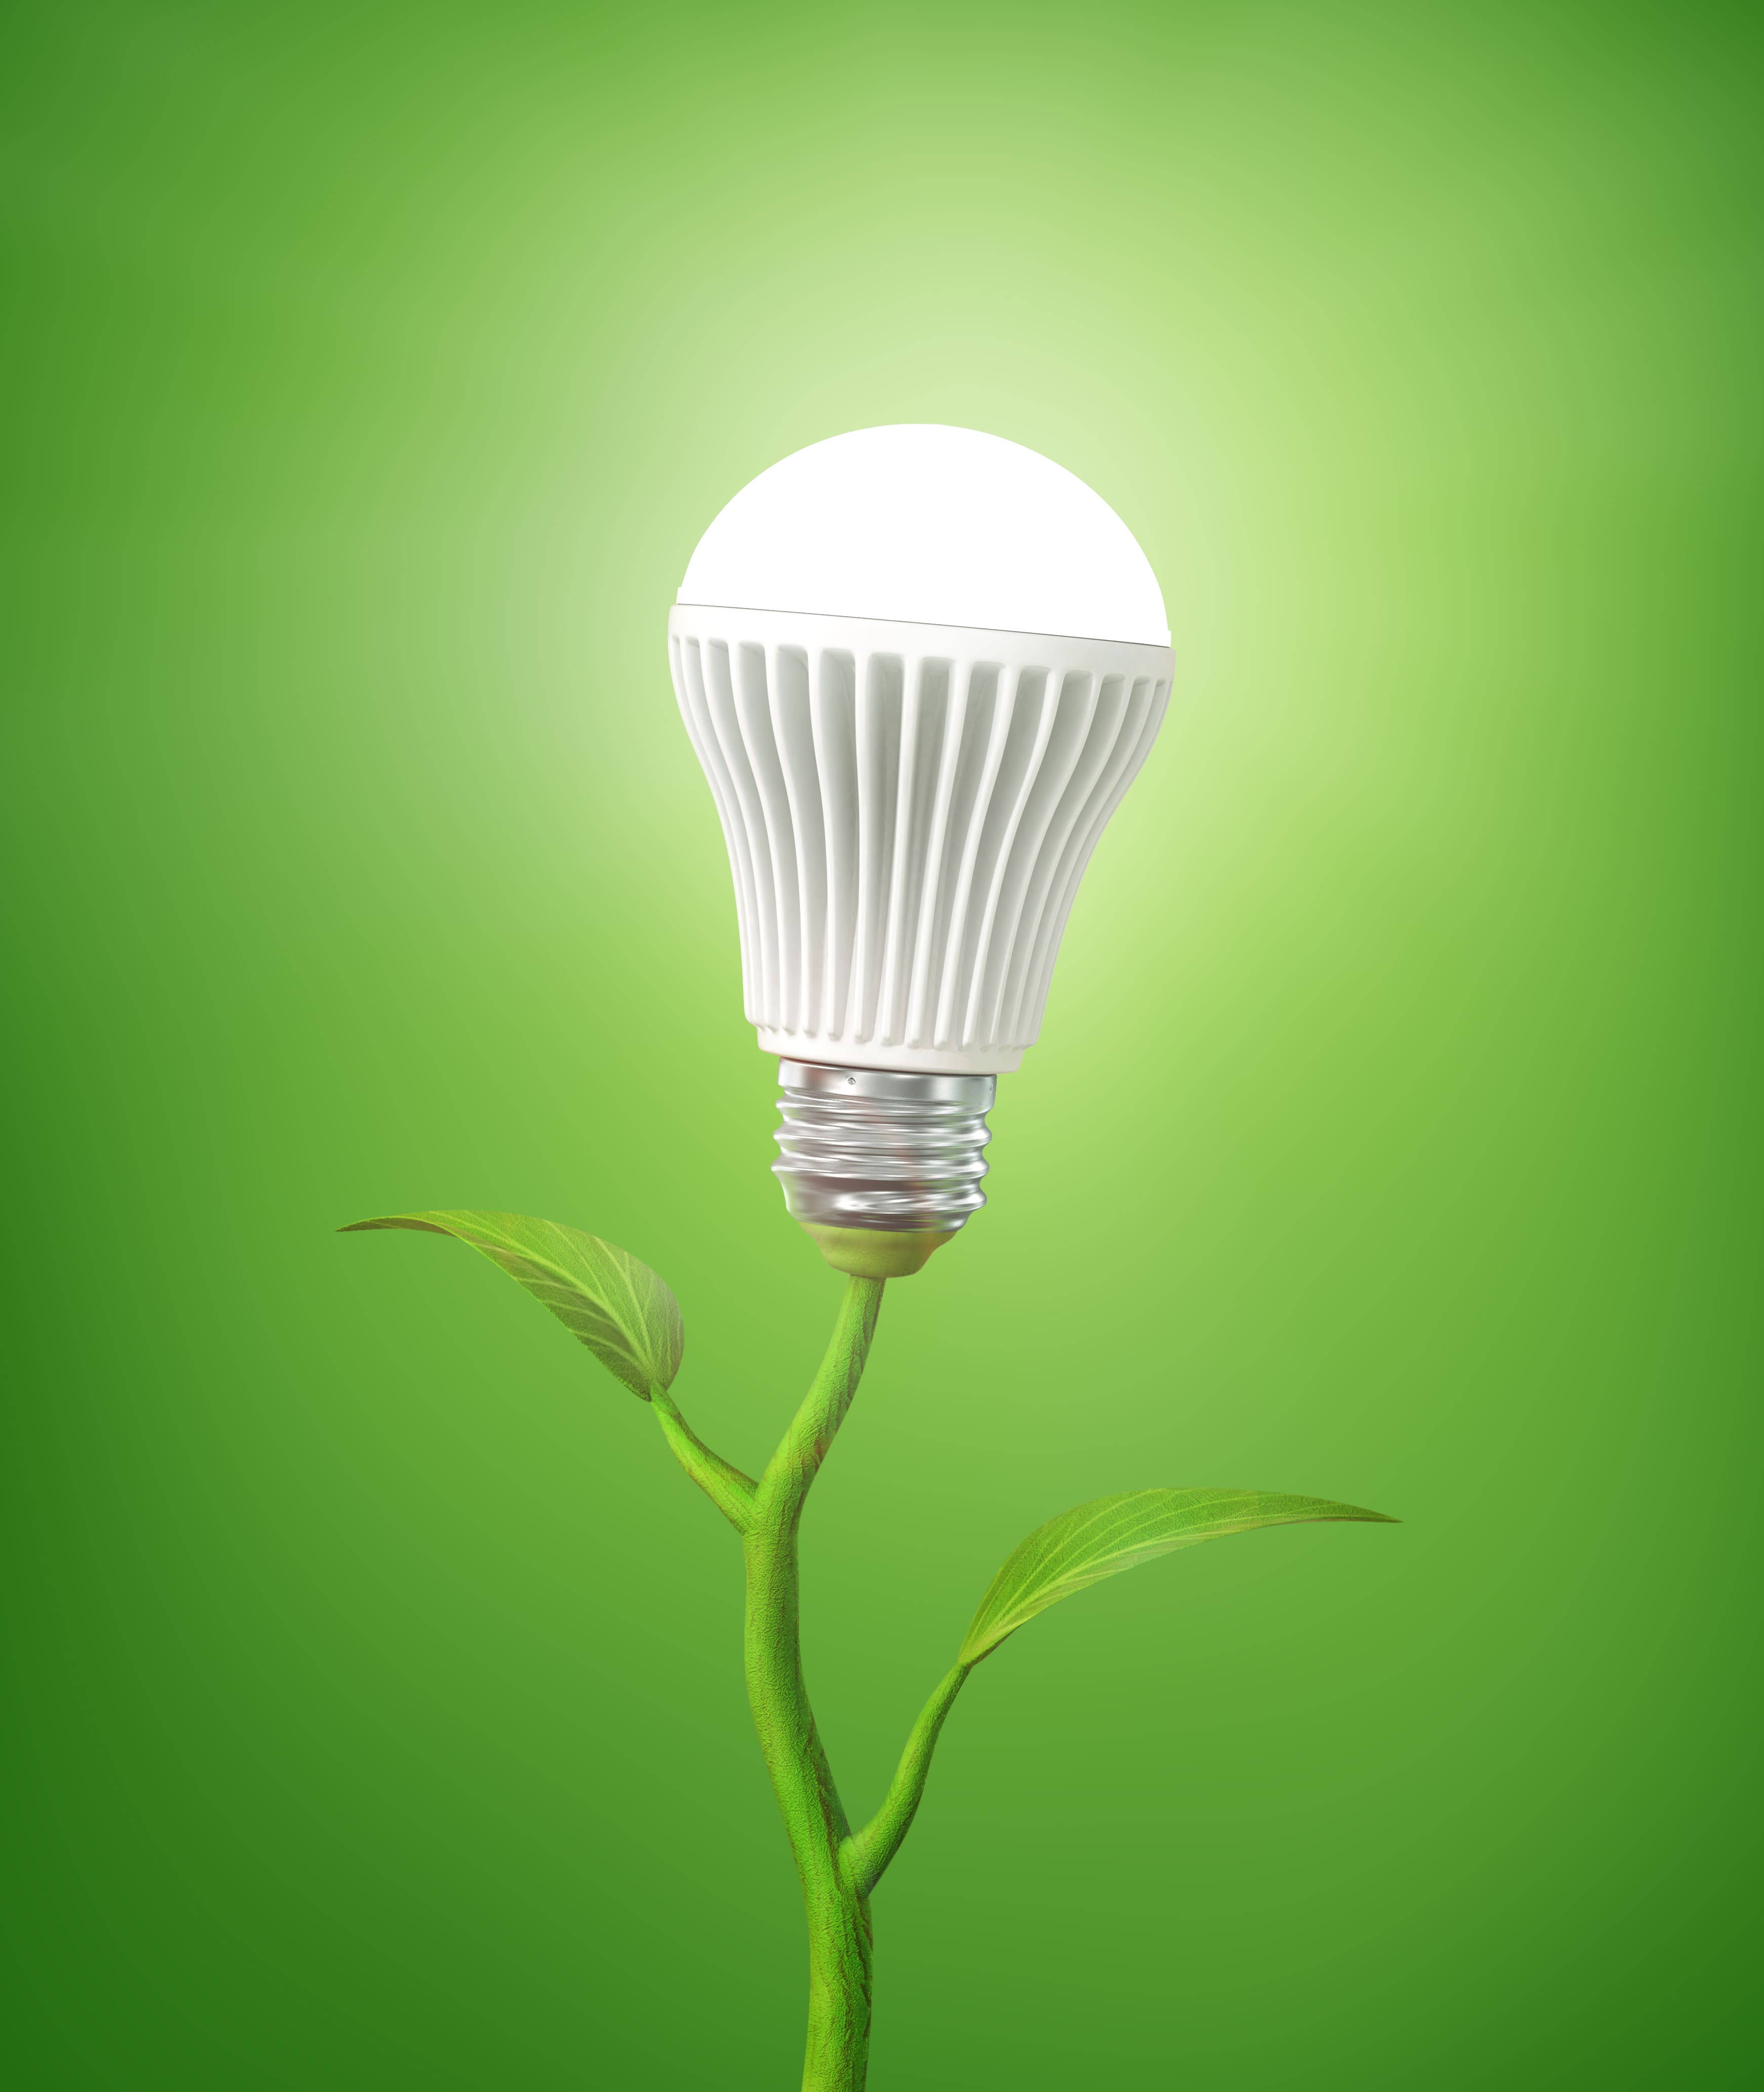 Why Halogen Bulbs Will be Phased Out This Year